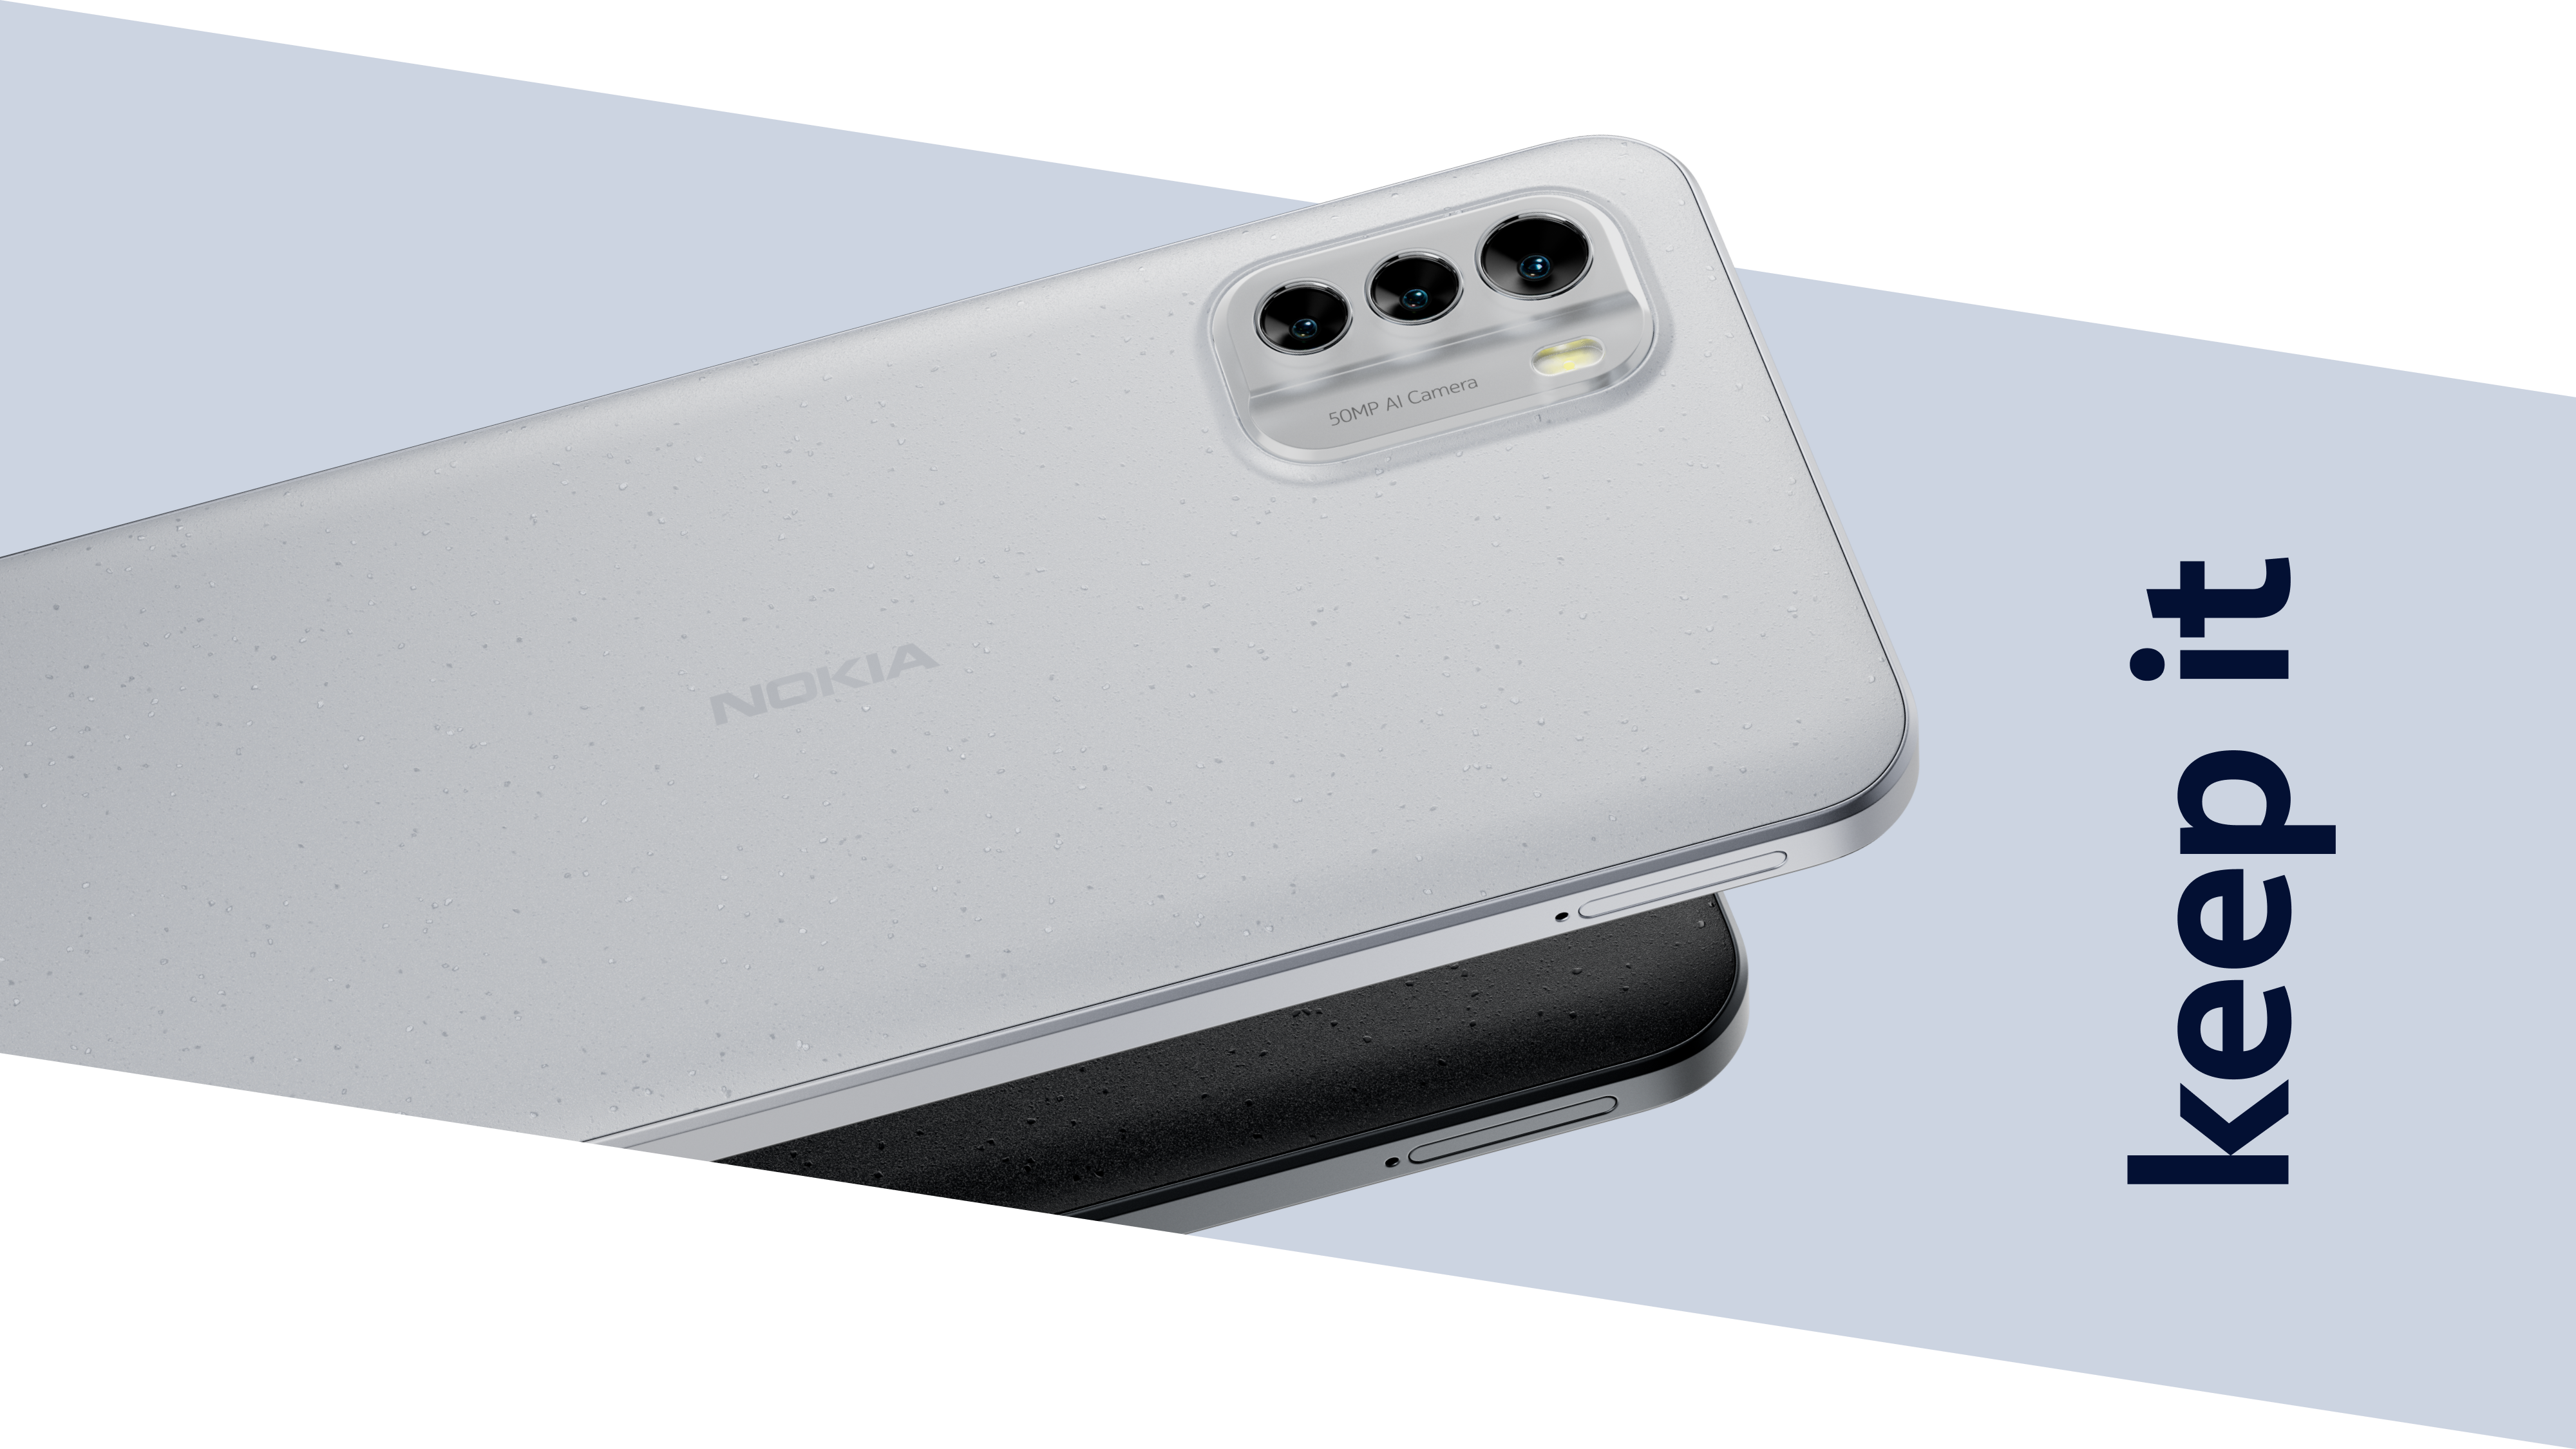 triple MP Nokia with 50 smartphone 5G G60 camera